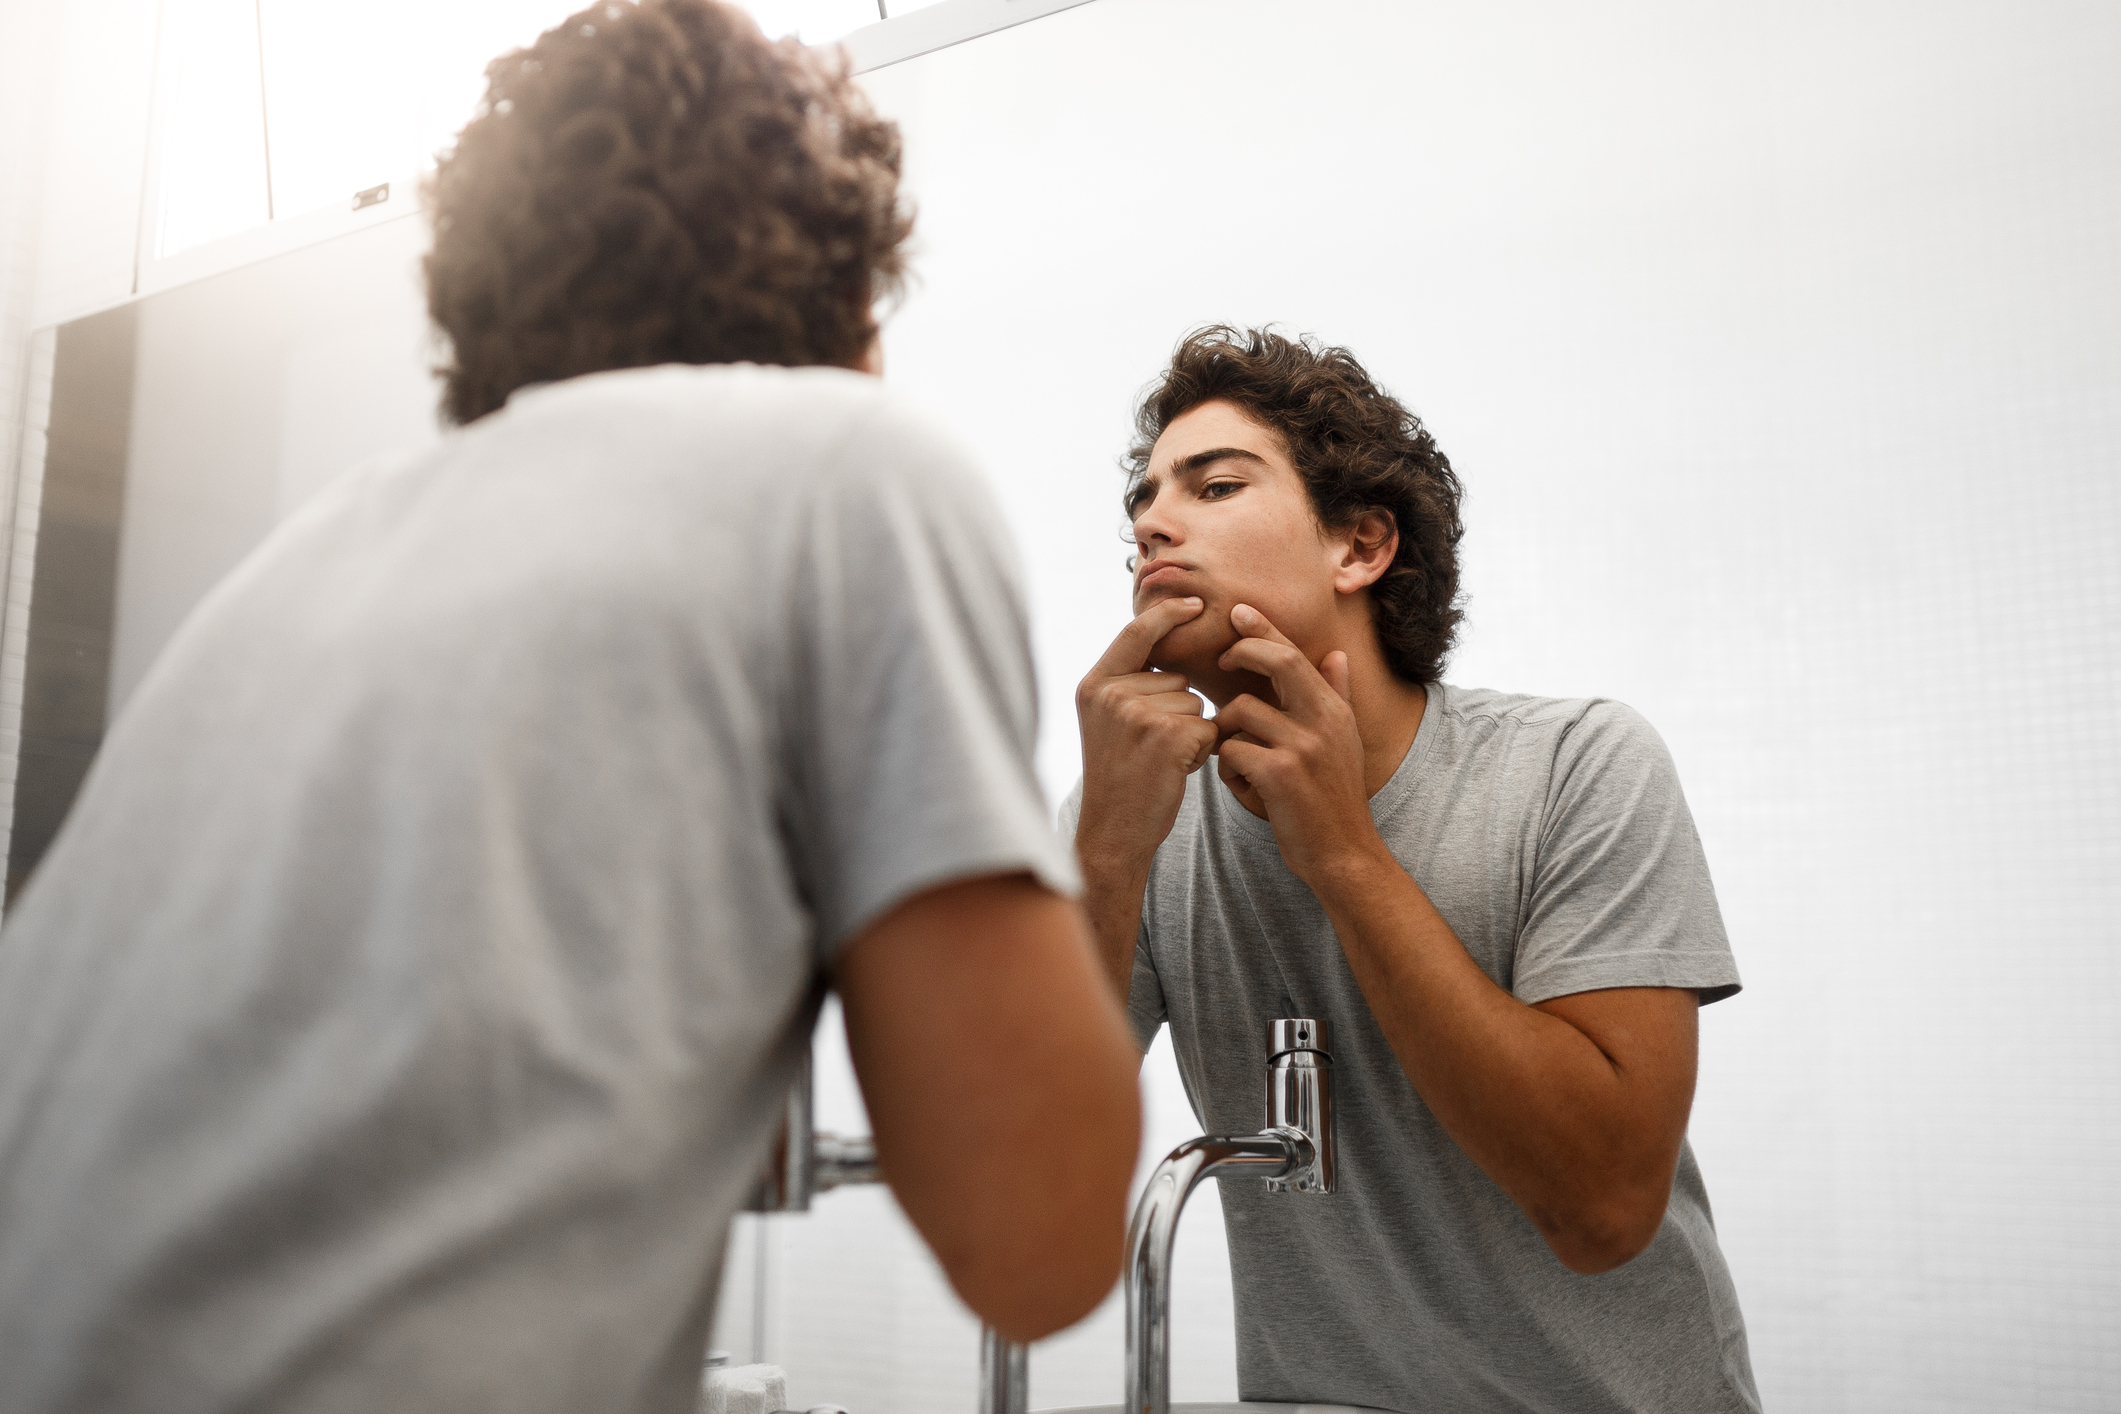 A young boy squeezing pimple in front of bathroom mirror.